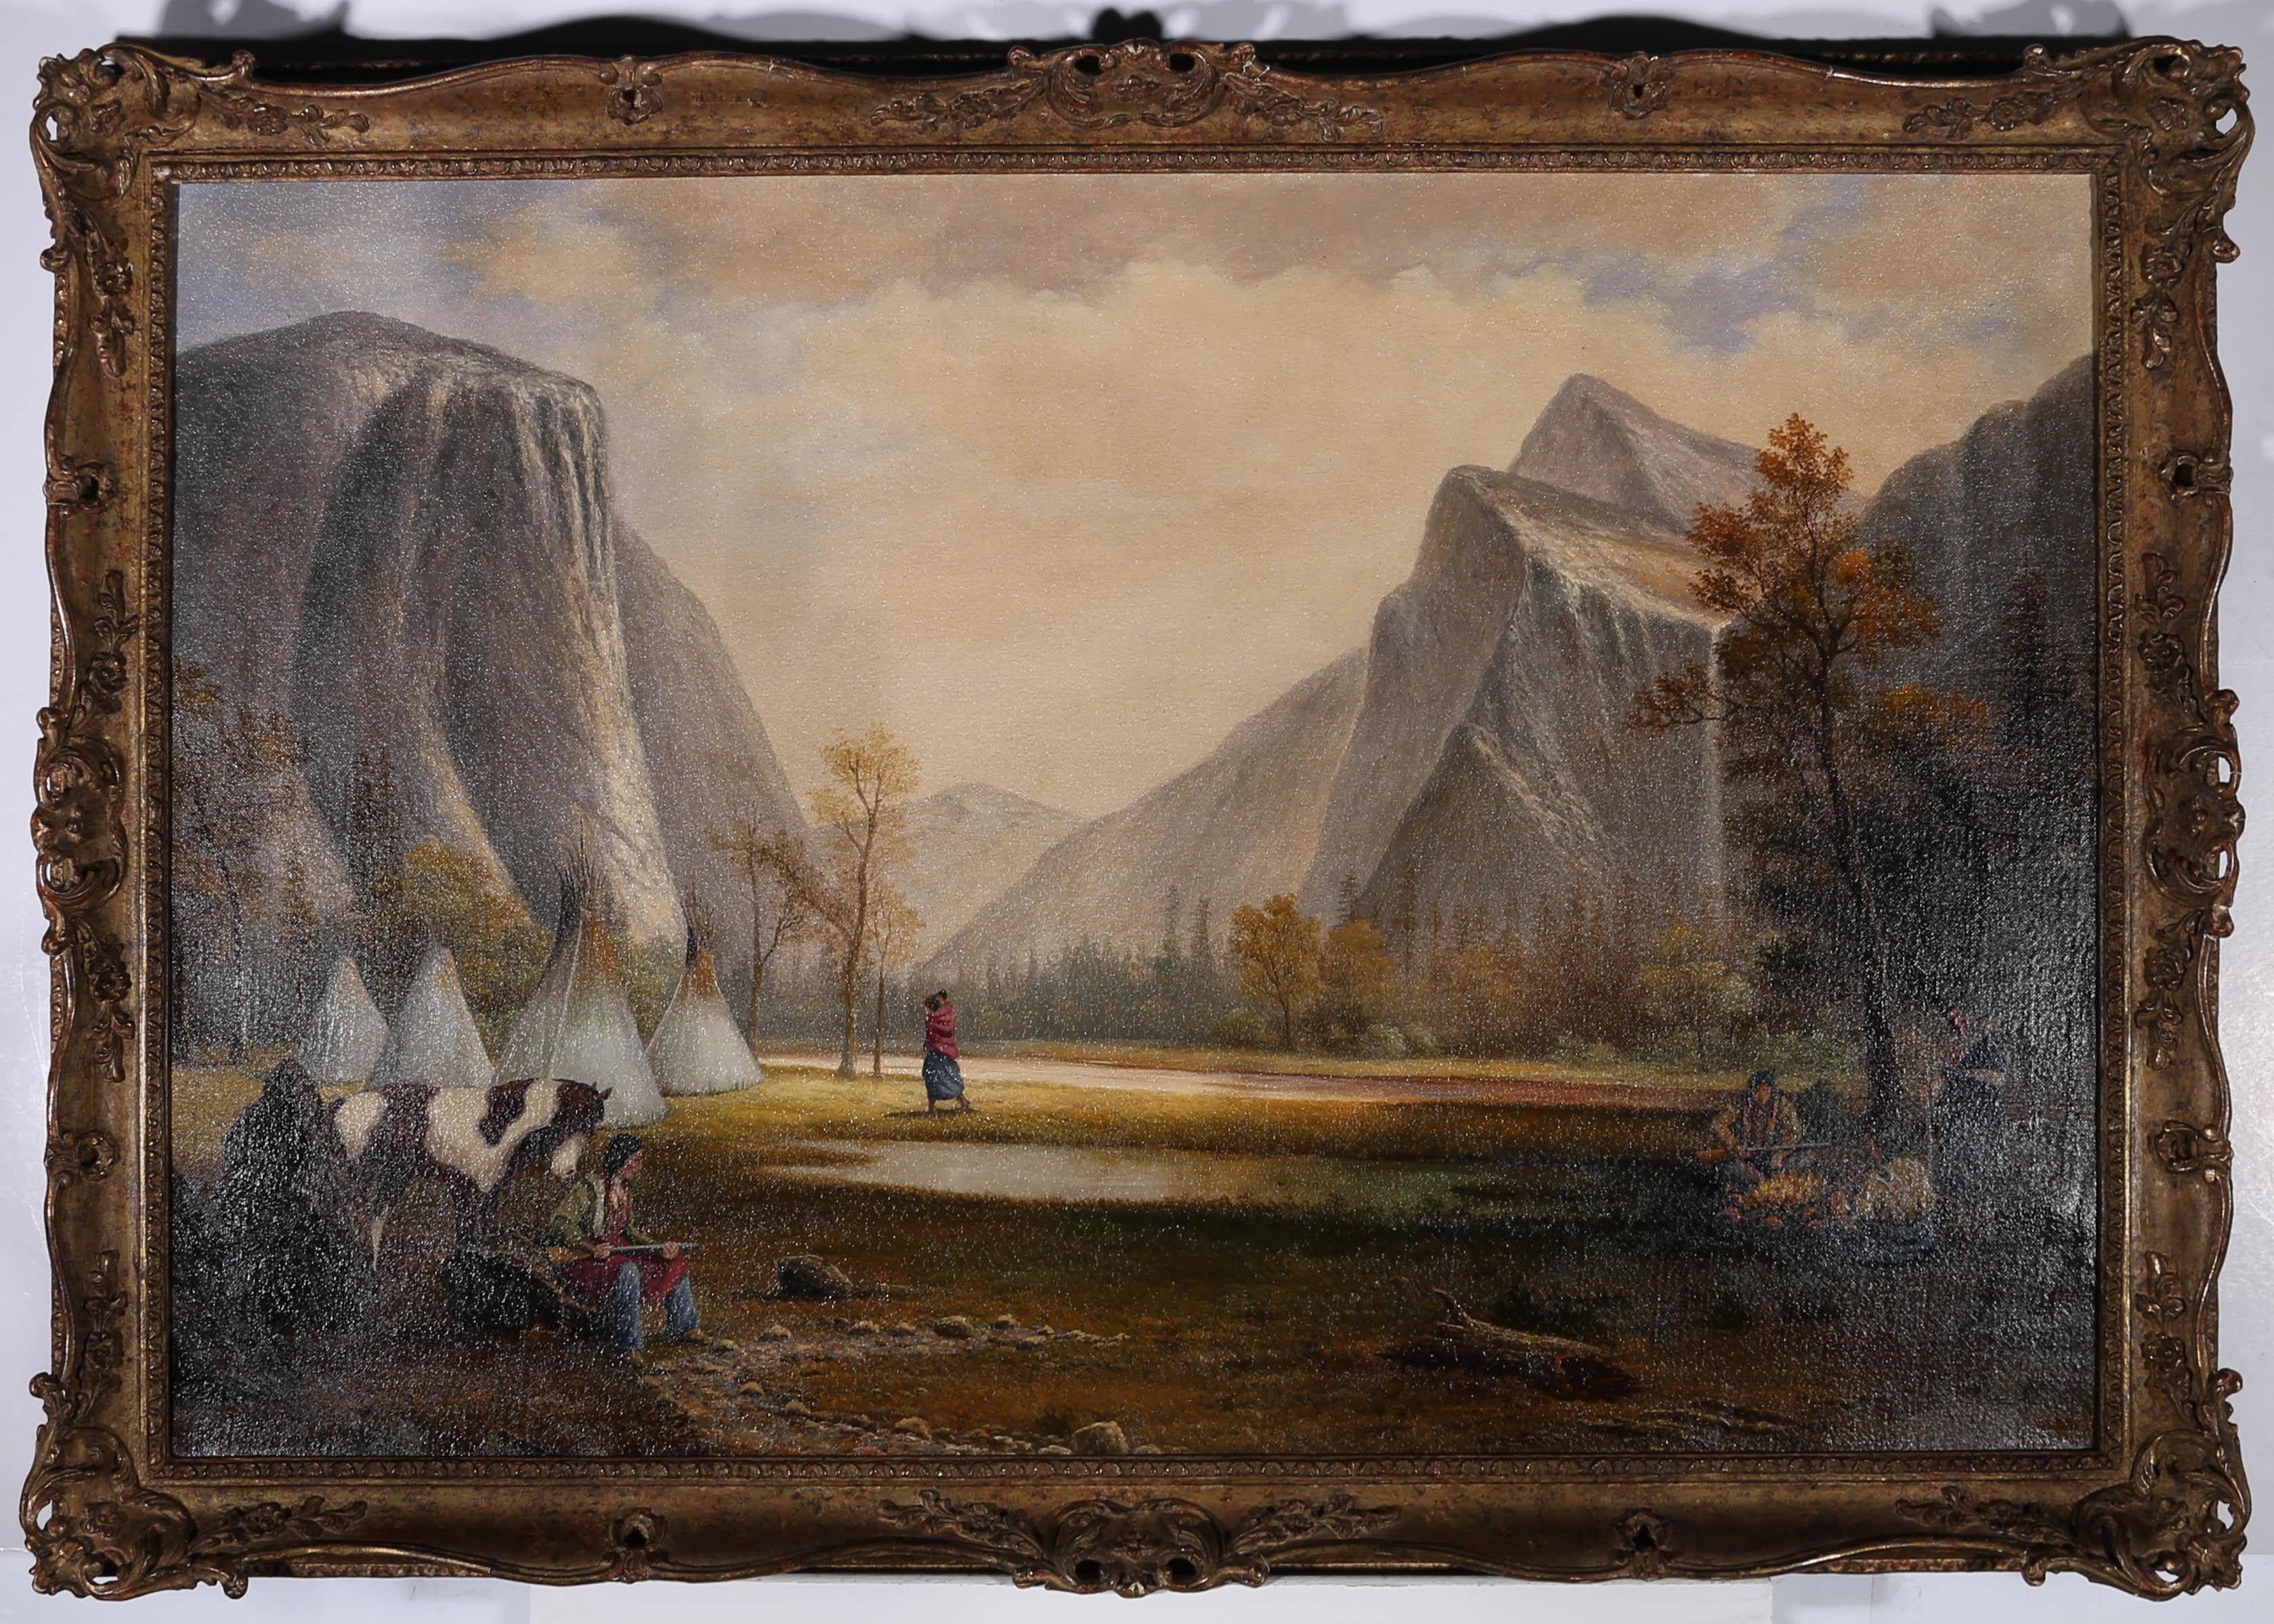 A striking, 19th Century landscape in oil showing the impressive Yosemite valley with an imposing view of El Capitan. A group of Yosemite Indians have set up camp on the grassy plains of the valley, with wigwams and a campfire. This impressively